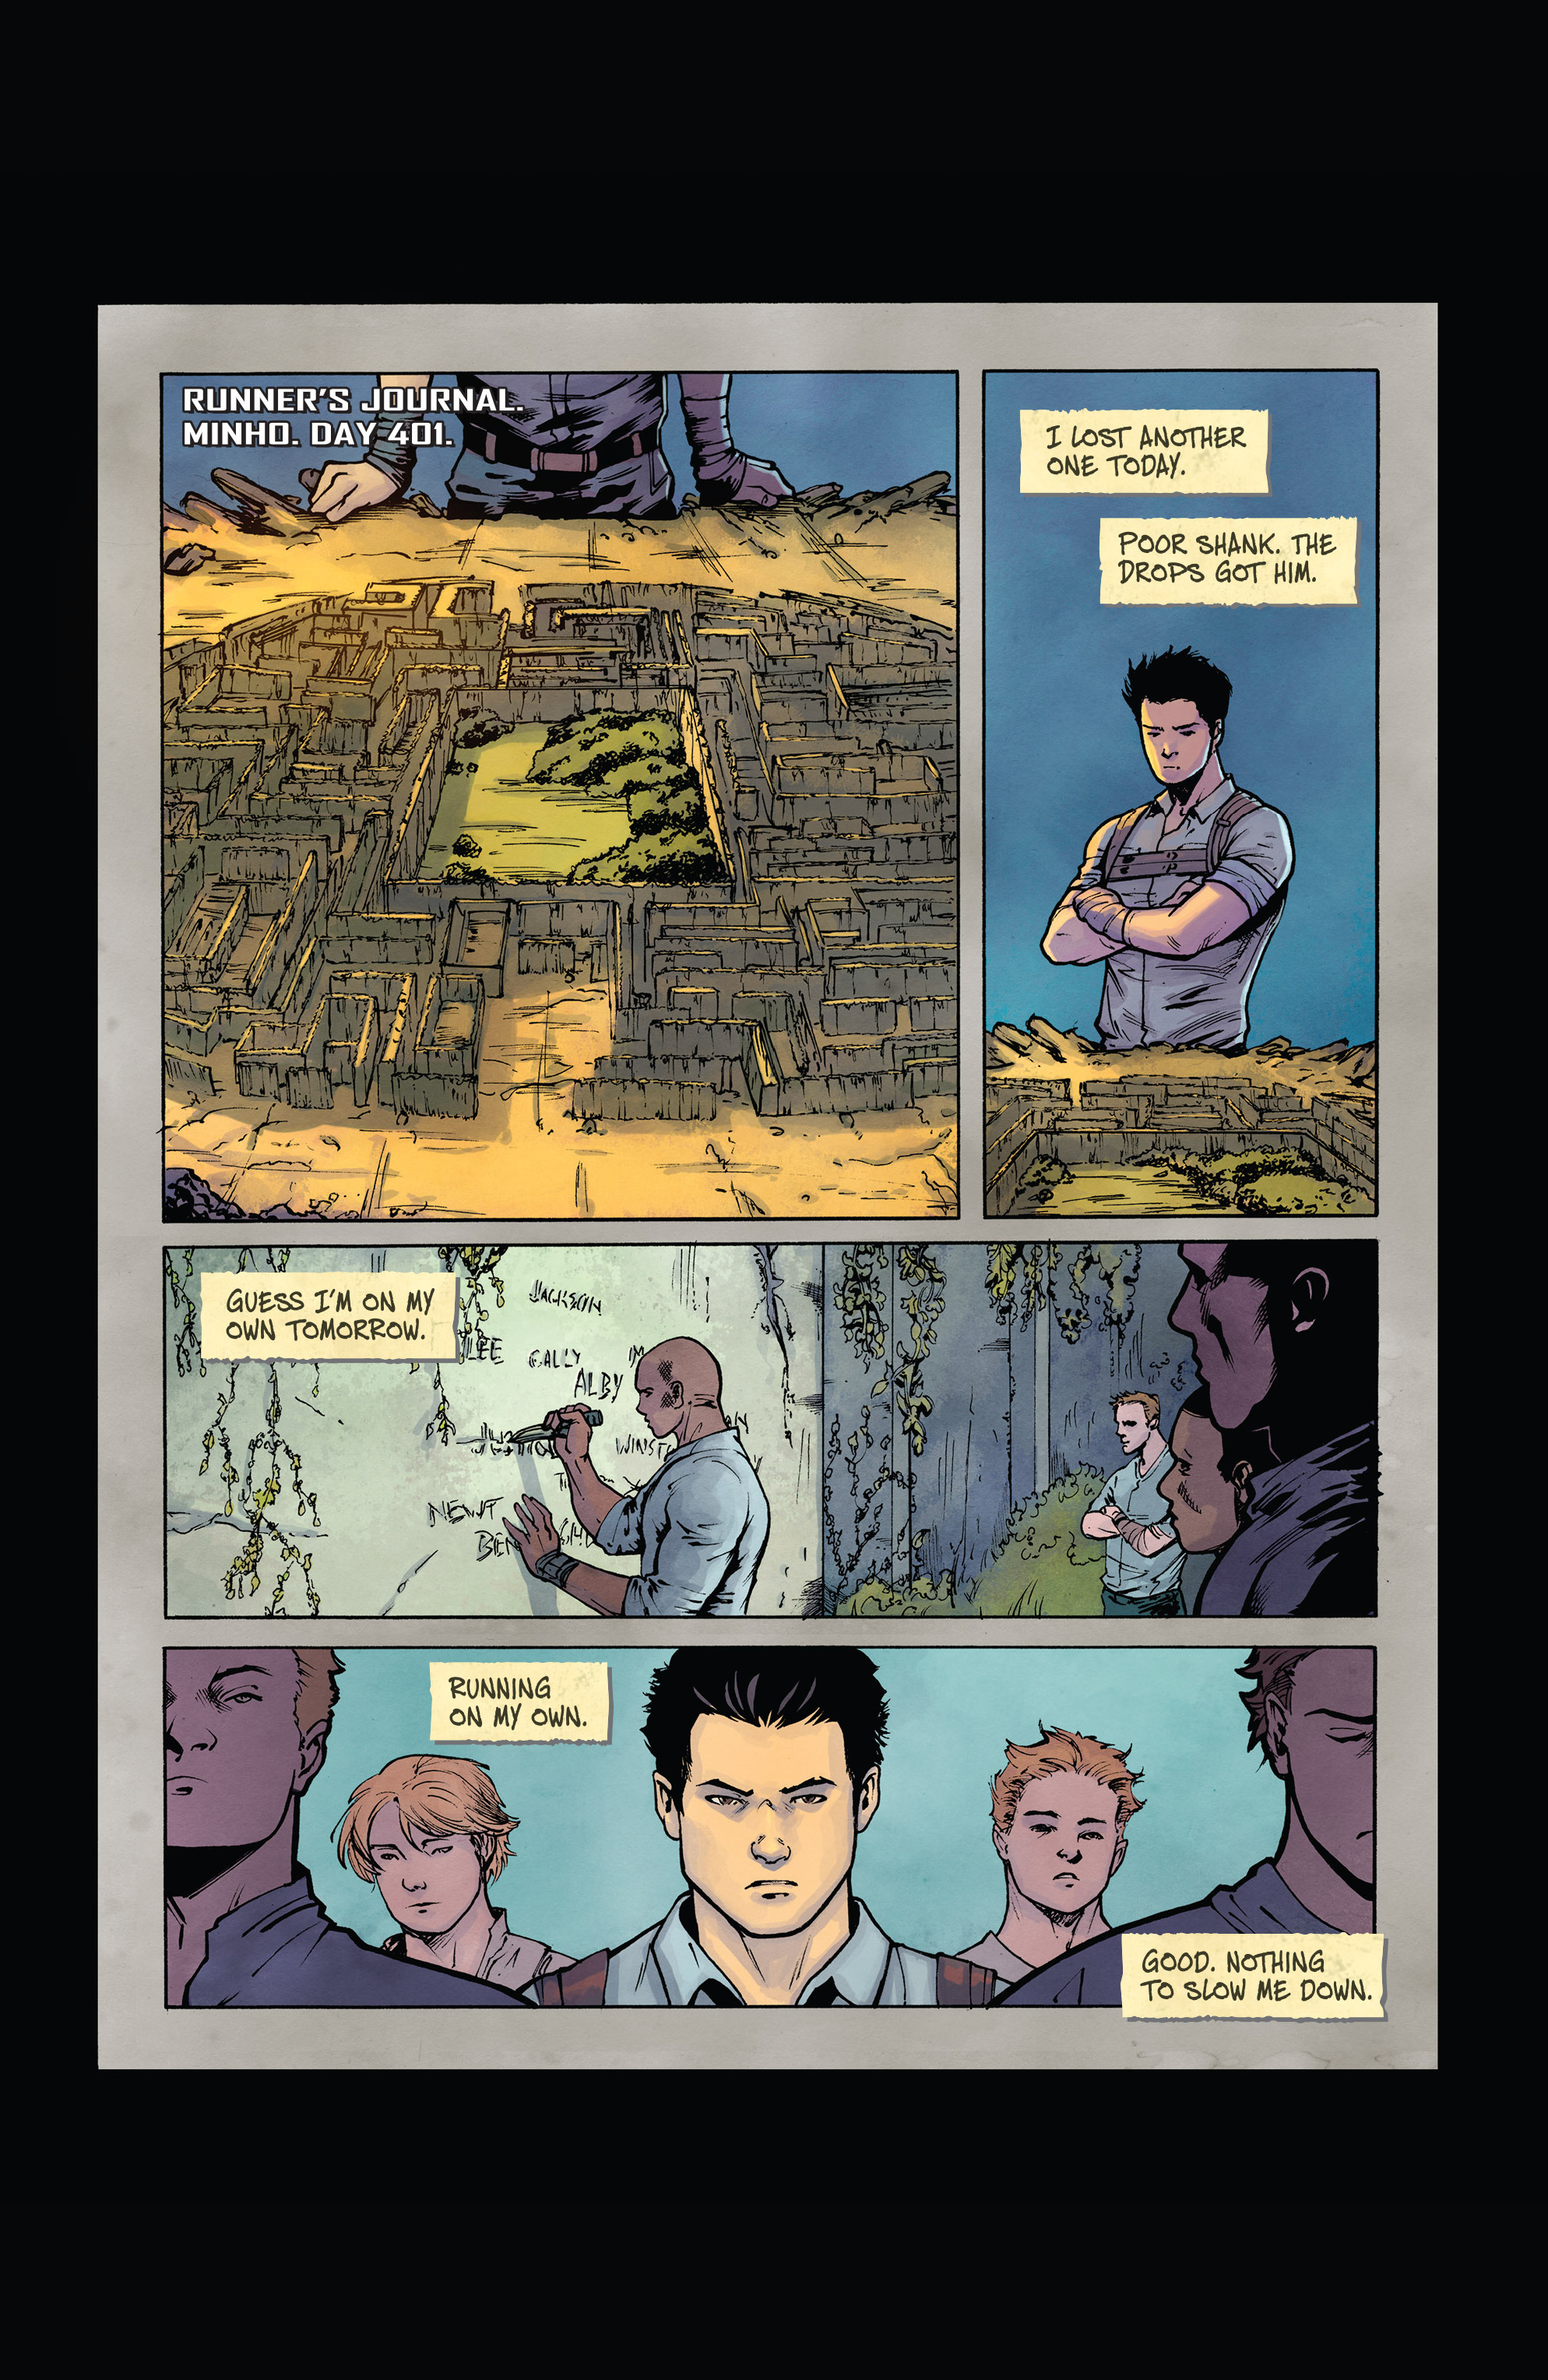 Maze Runner The Scorch Trials The Official Graphic Novel Prelude